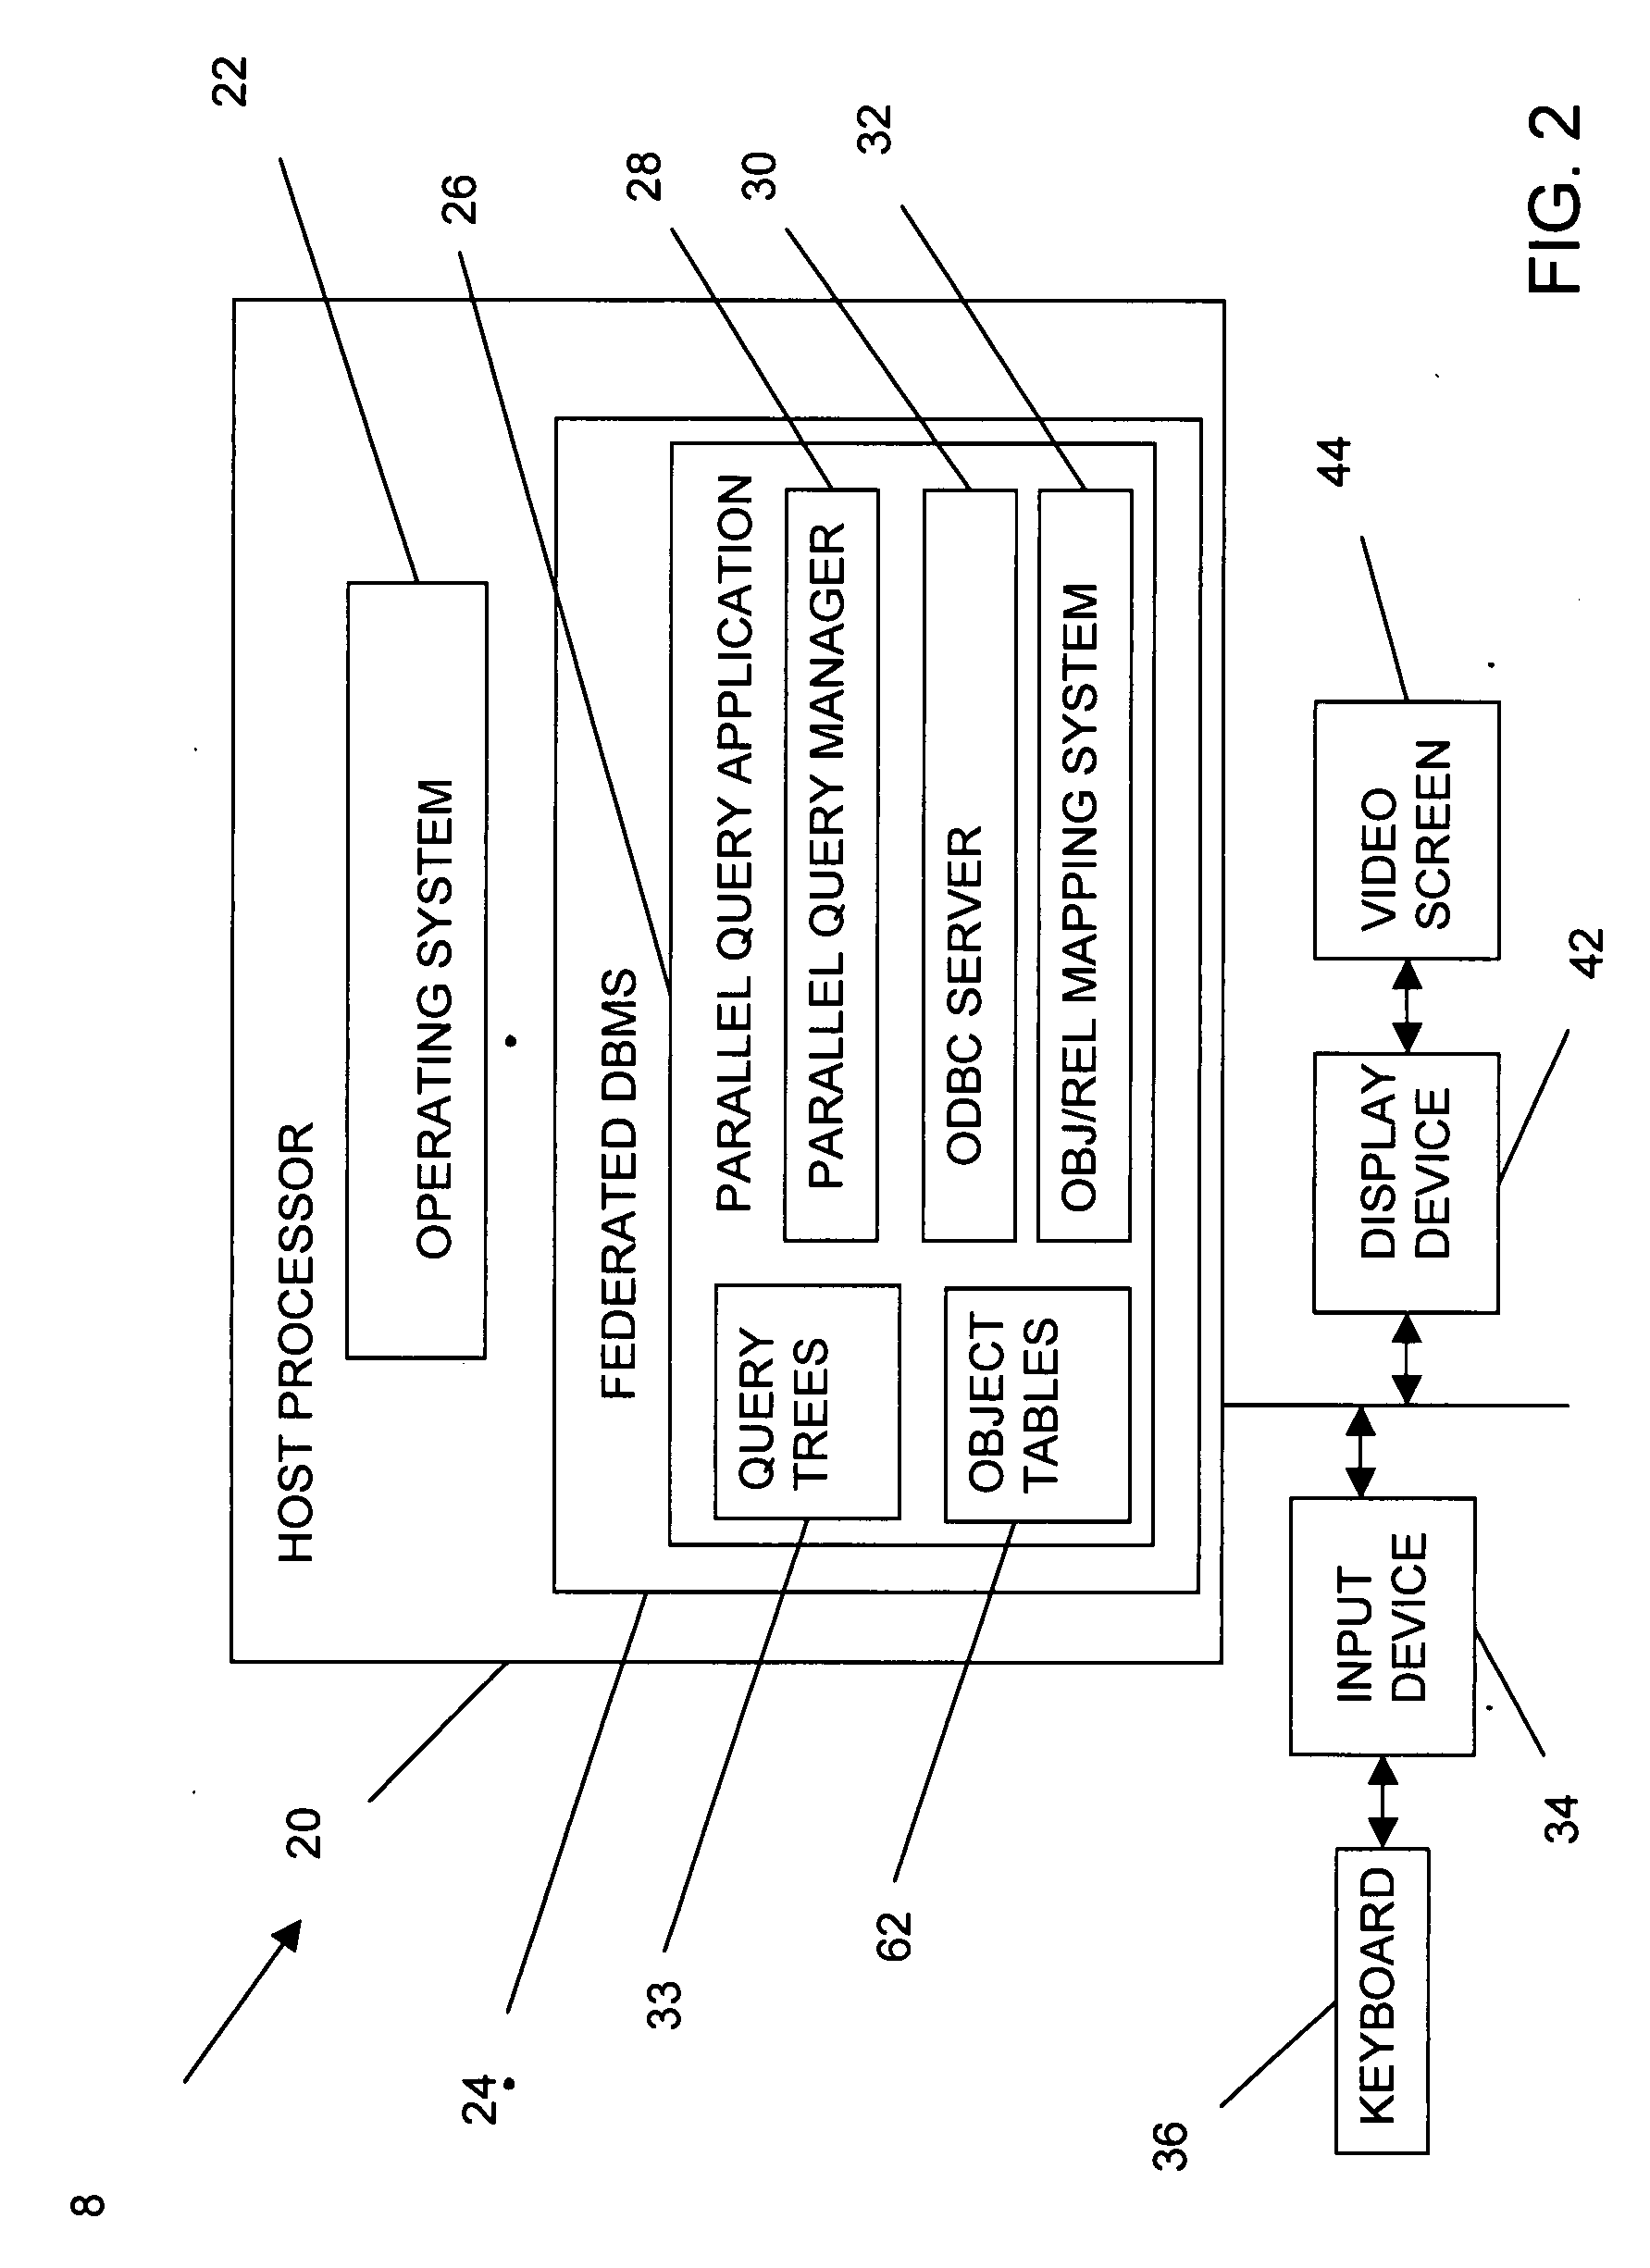 Method, system and computer-readable media for software object relationship traversal for object-relational query binding